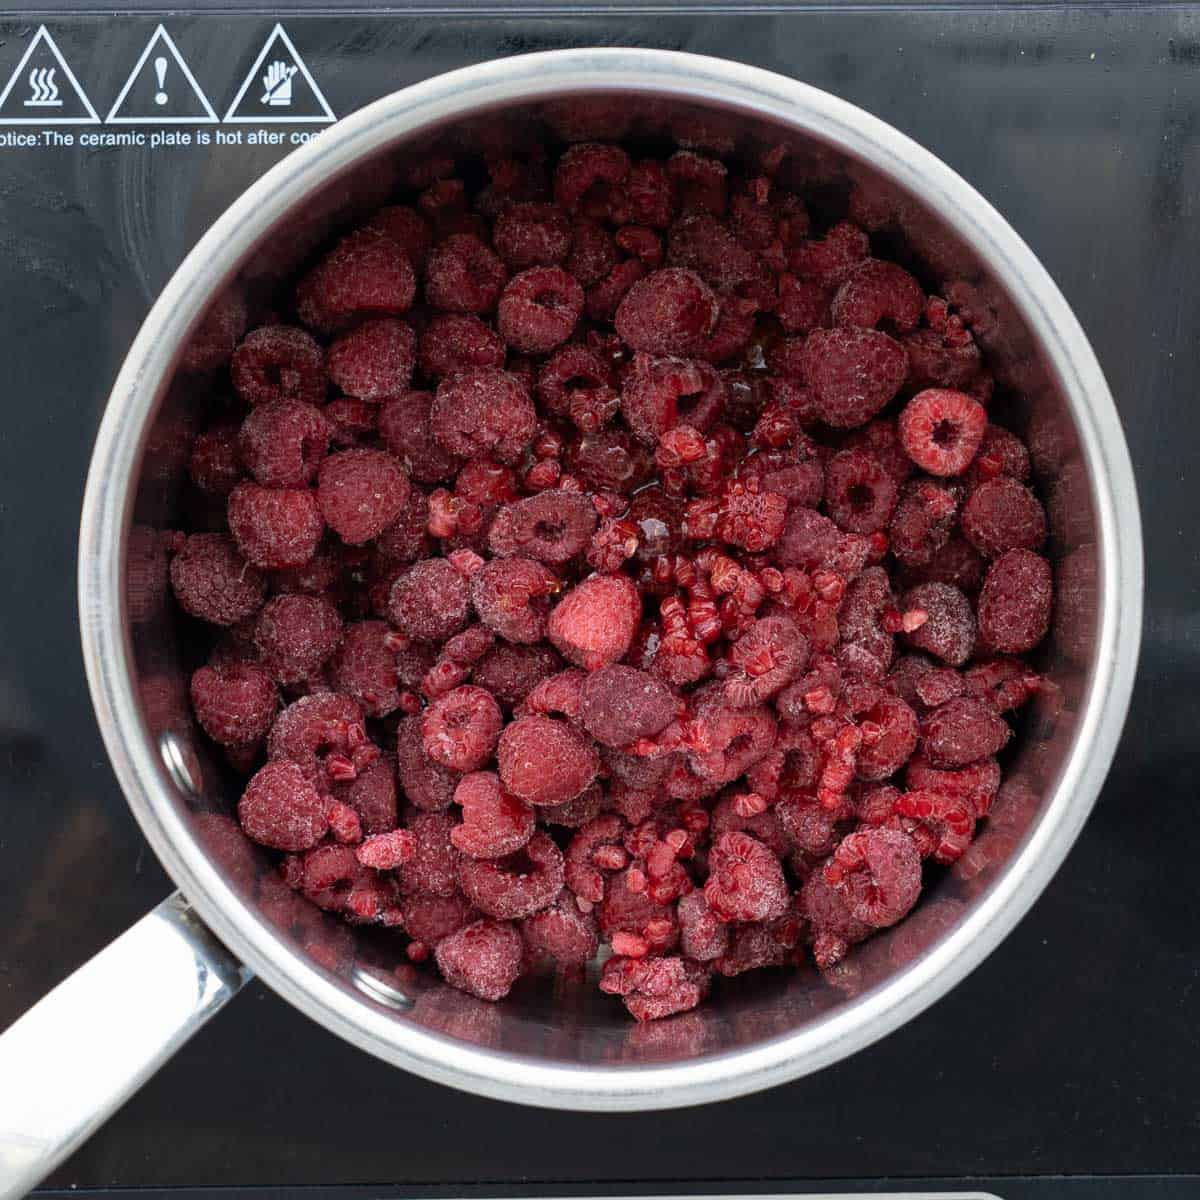 All the ingredients to make the raspberry puree in a saucepan on the element 